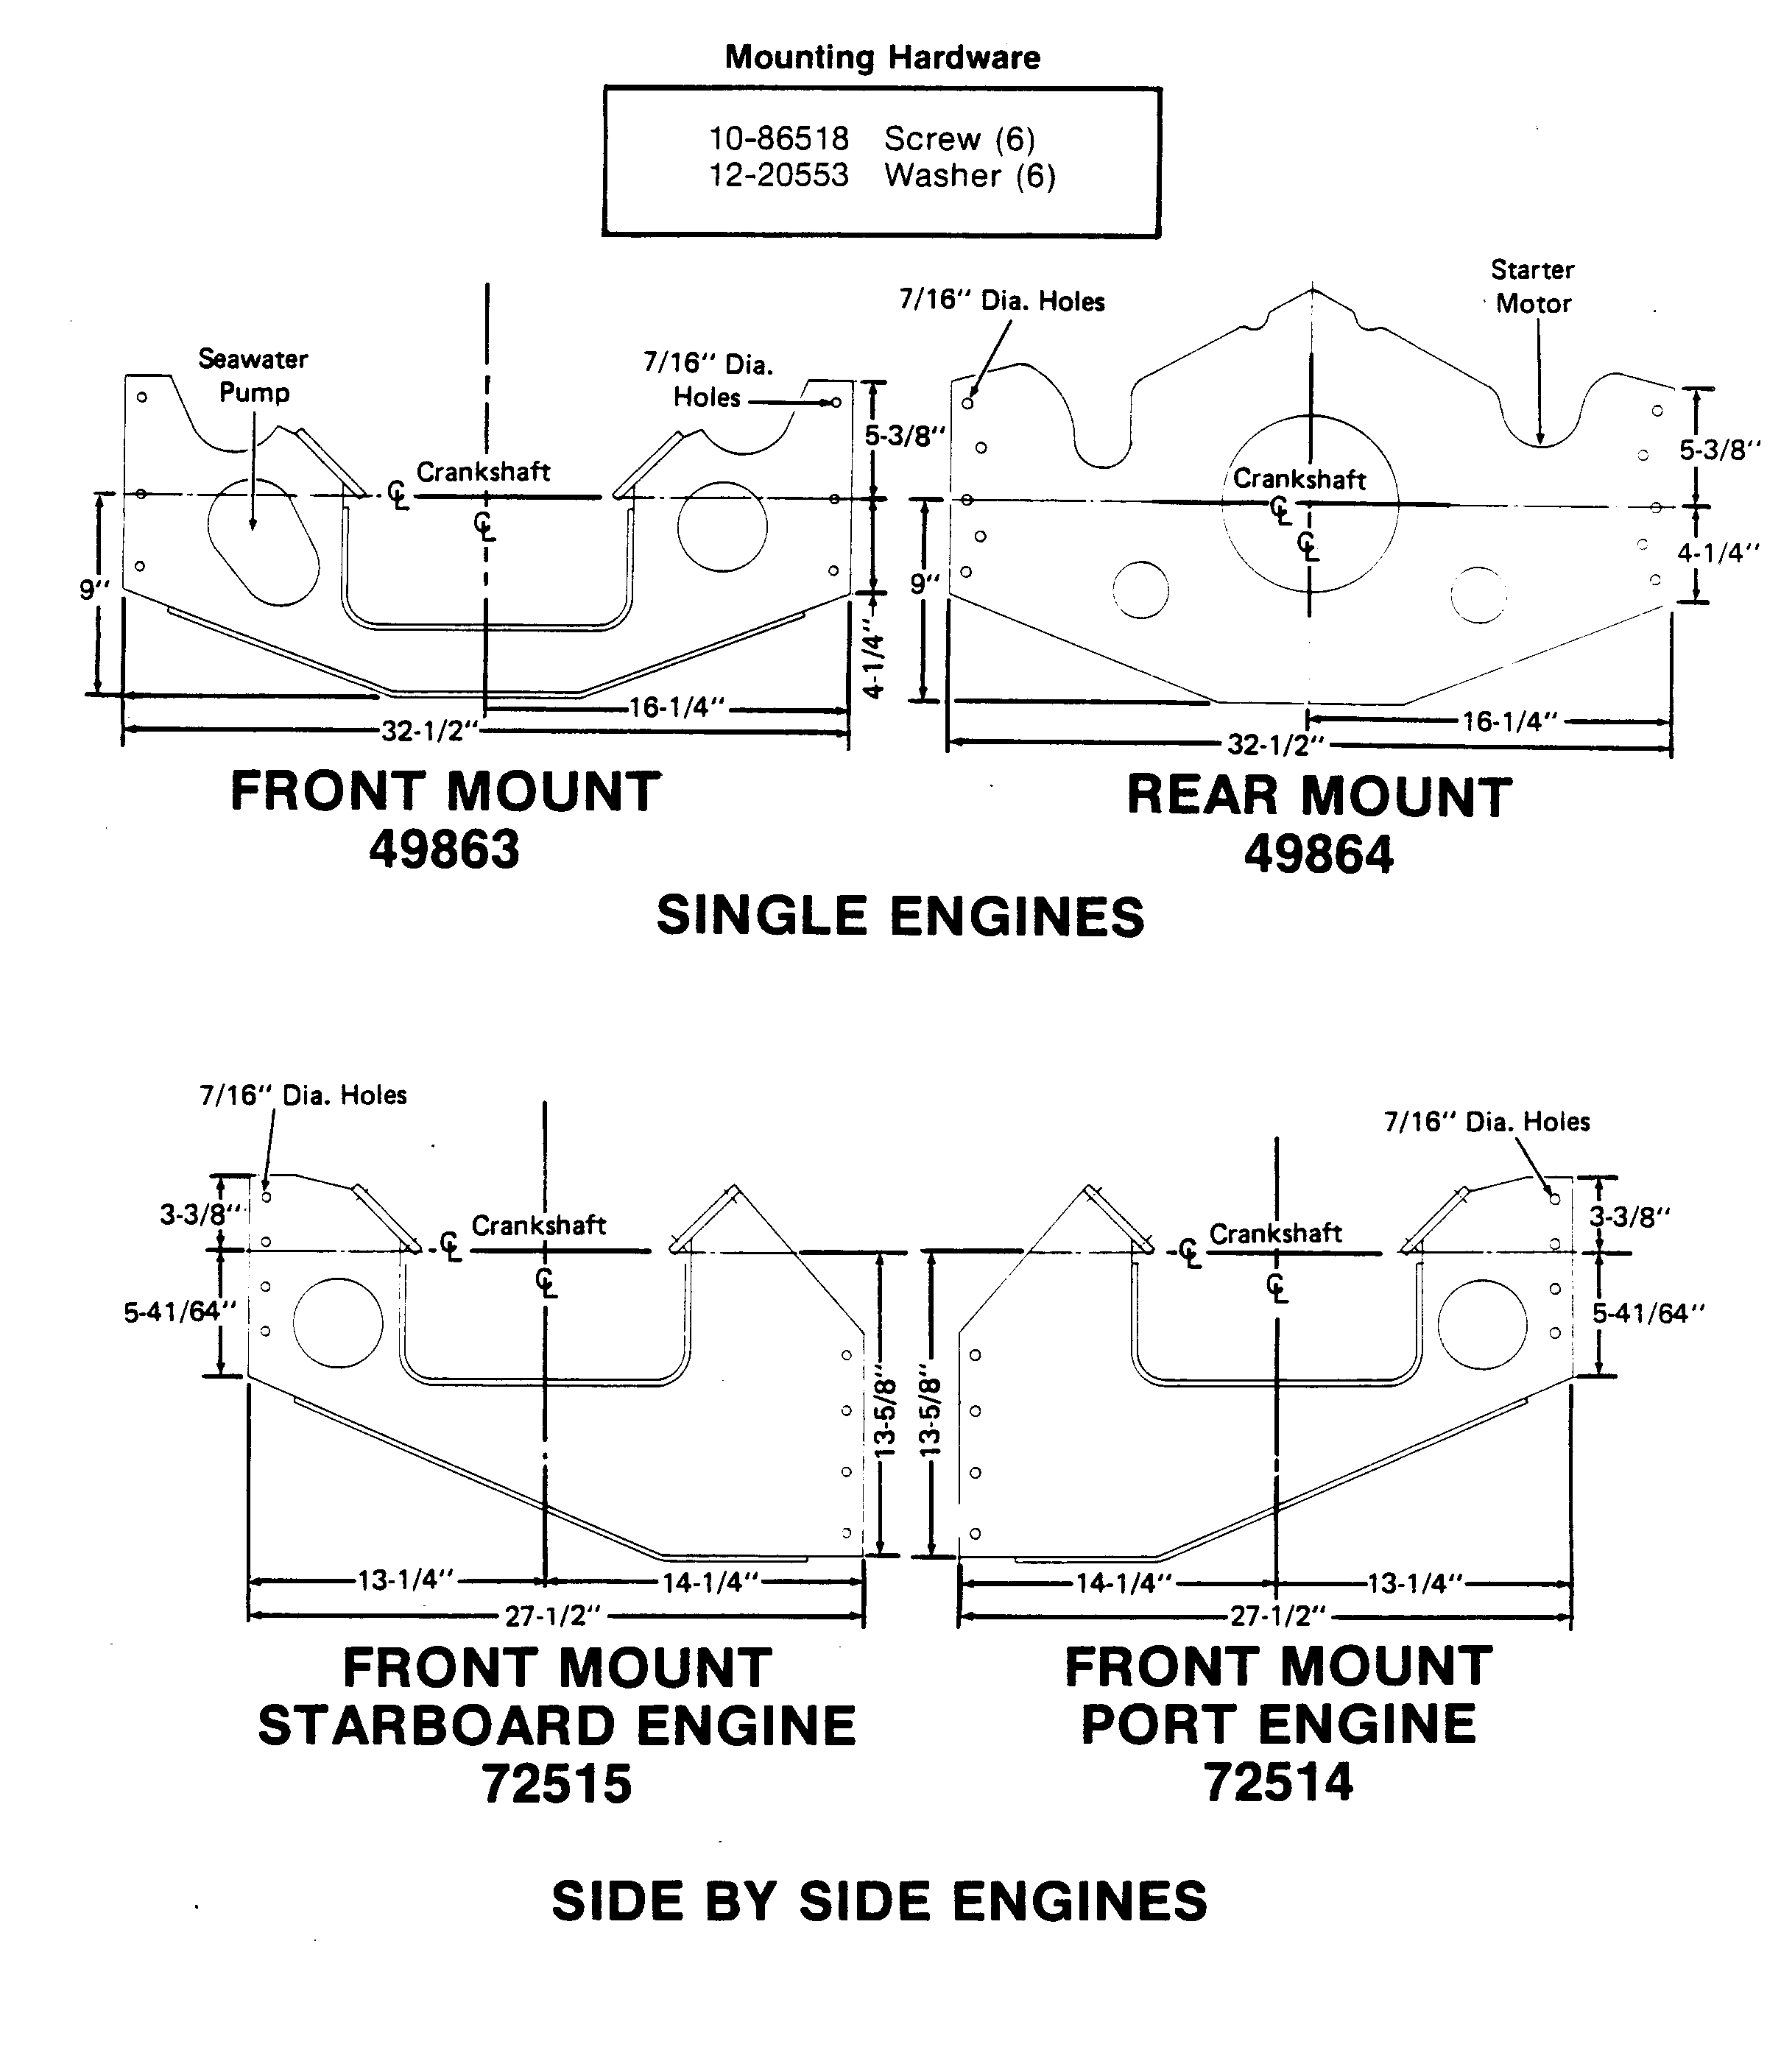 MOUNT PLATES(SINGLE, SIDE BY SIDE ENGINES)